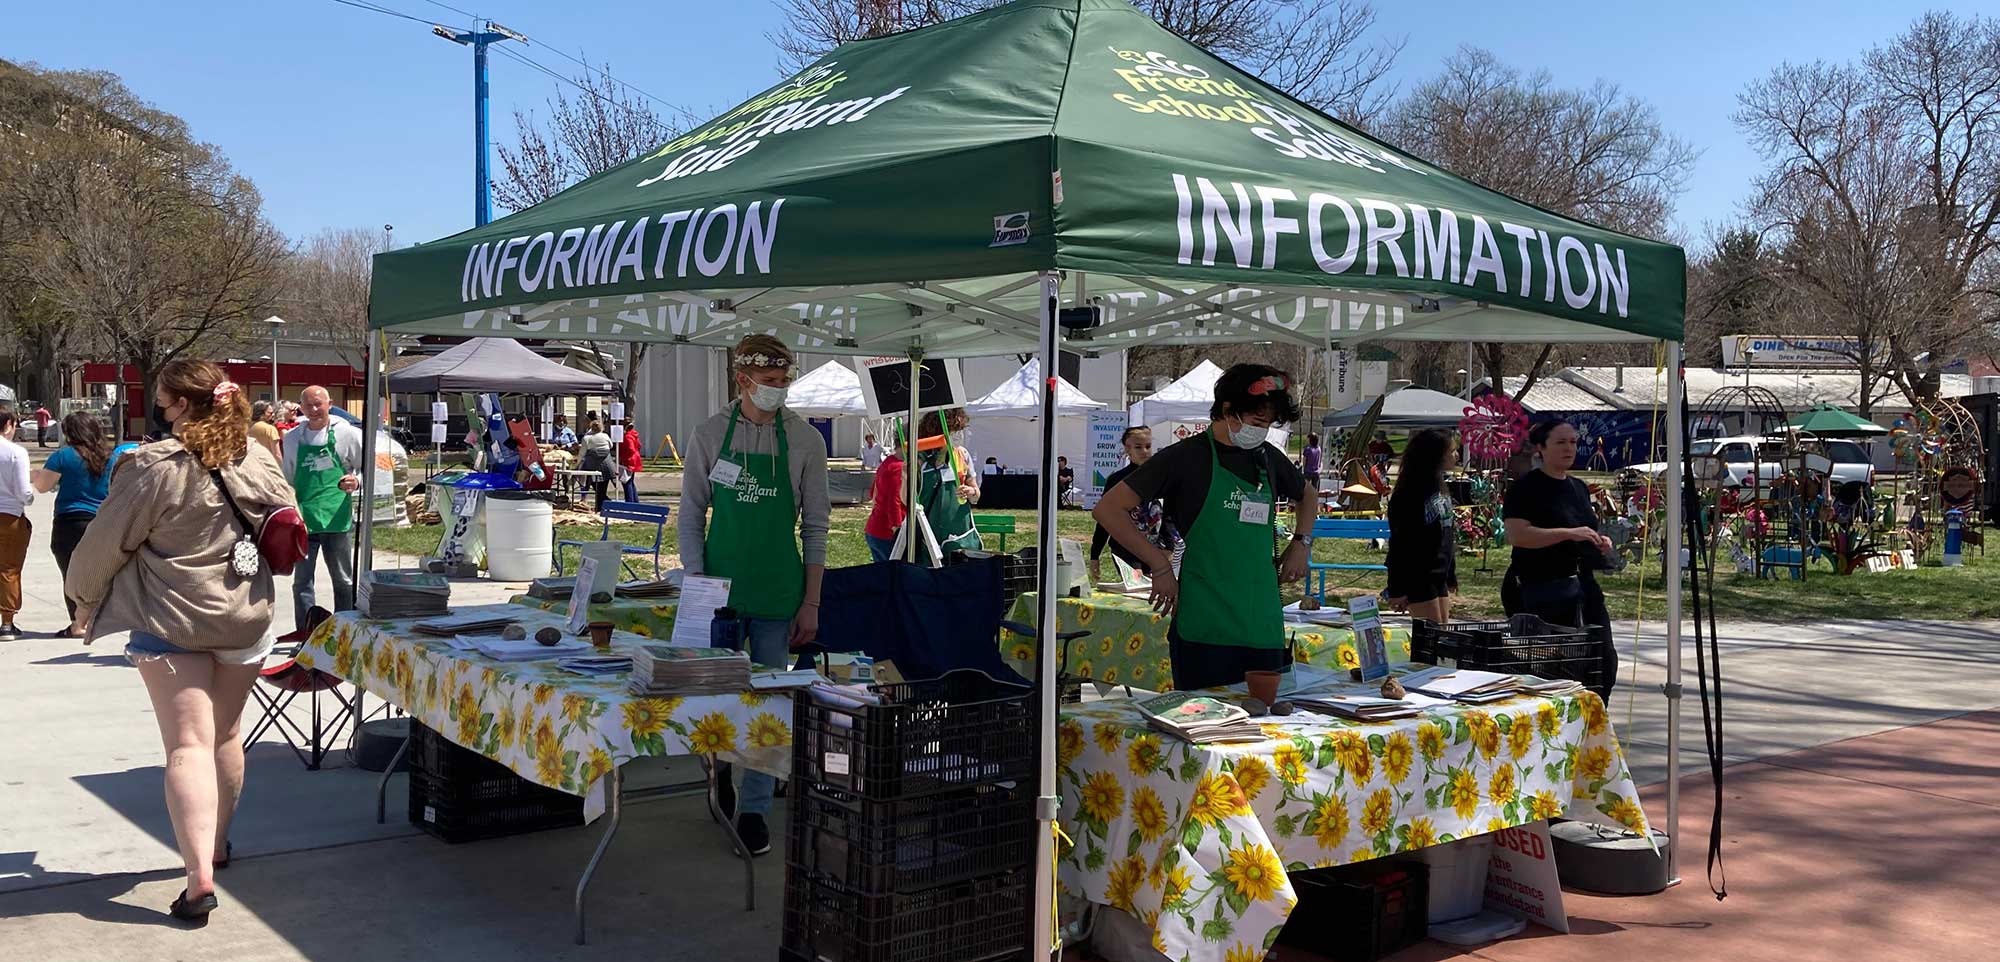 Green popup tent labeled INFORMATION, people with plant sale aprons at tables underneath it